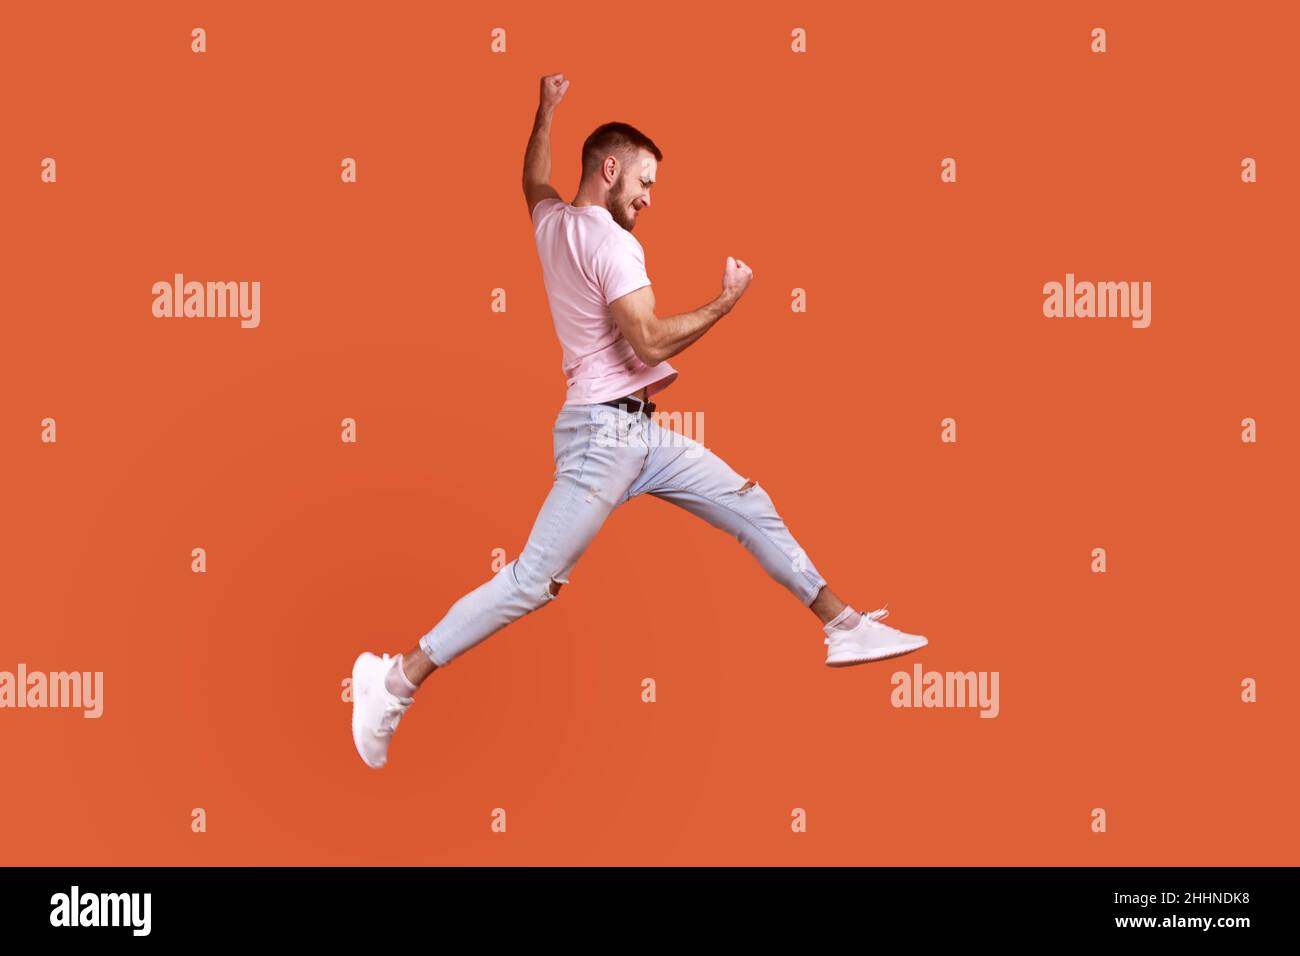 Side view portrait of happy bearded man jumping in air showing yes i did it gesture, copy space for ad, wearing pink T-shirt and jeans. Indoor studio shot isolated on orange background. Stock Photo